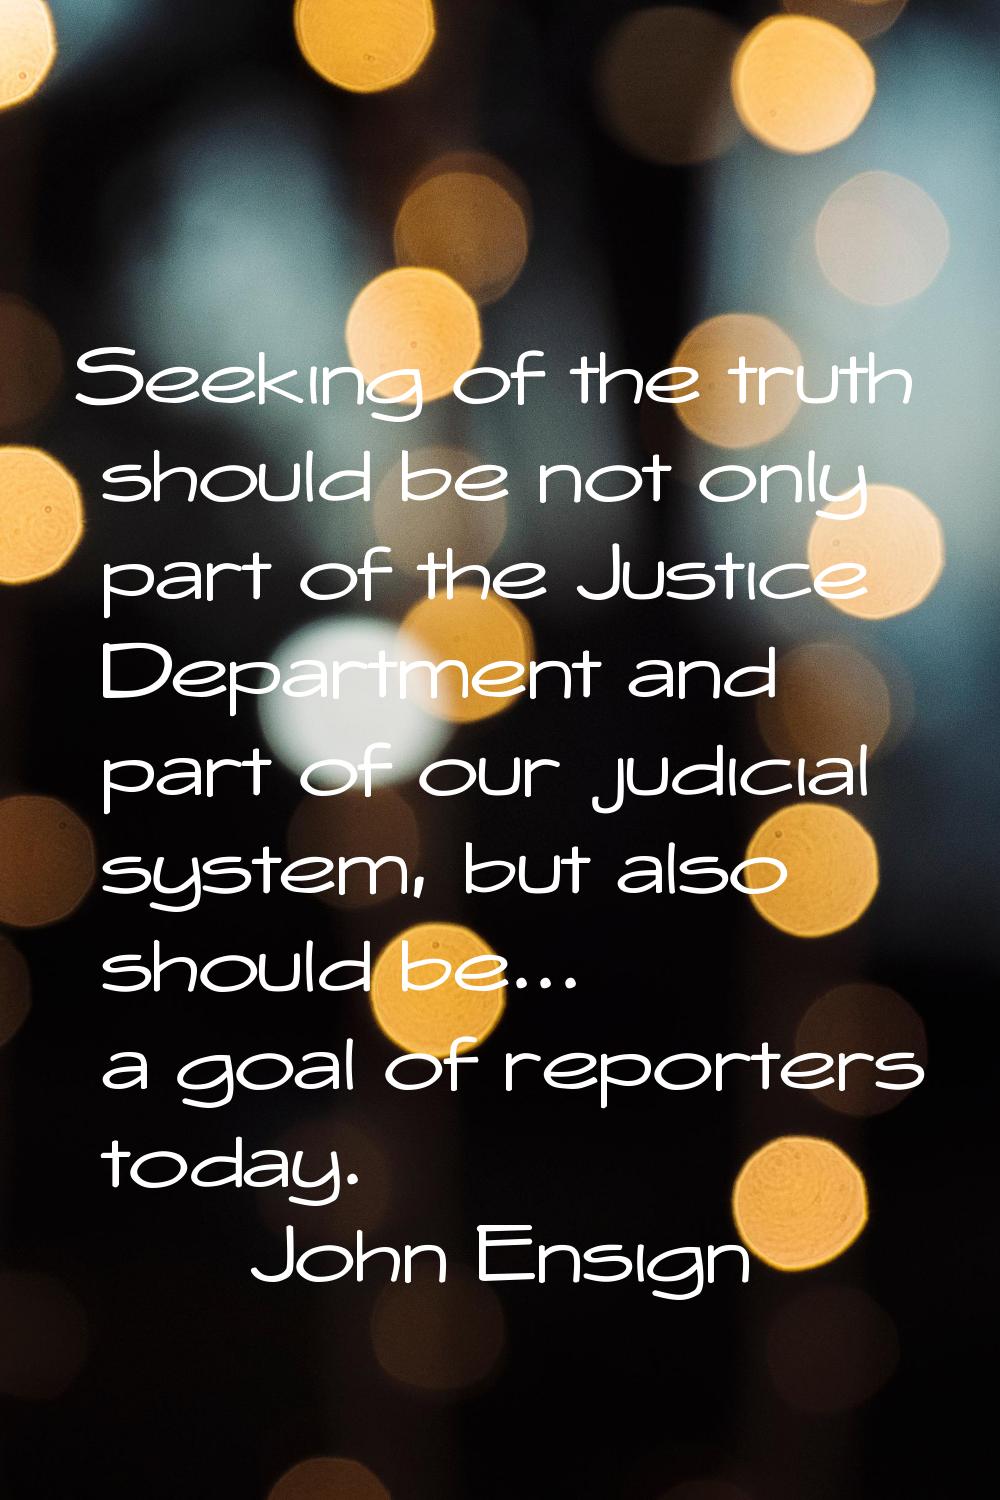 Seeking of the truth should be not only part of the Justice Department and part of our judicial sys